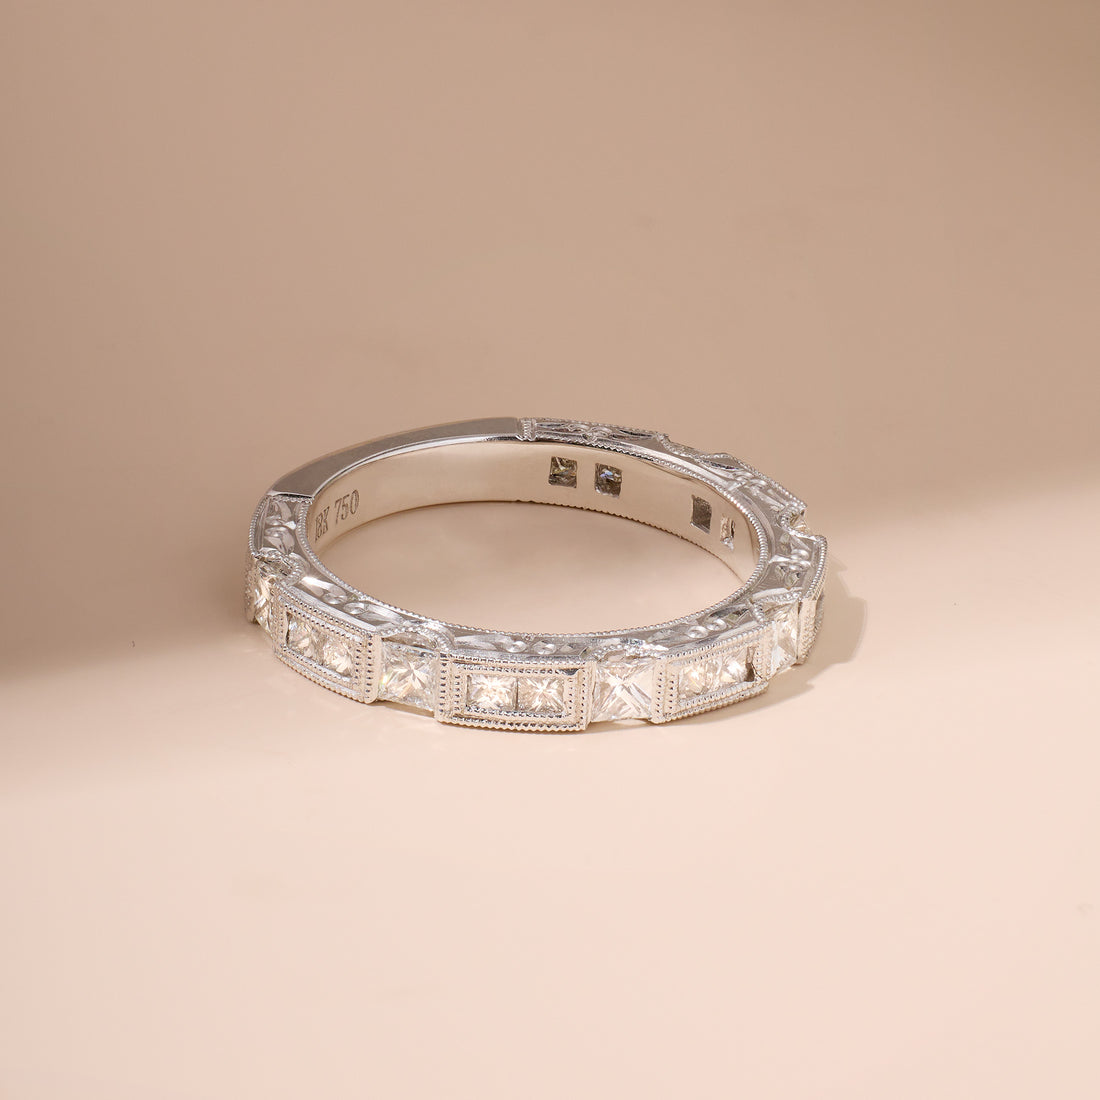 Vintage-Style Diamond Stackable Band